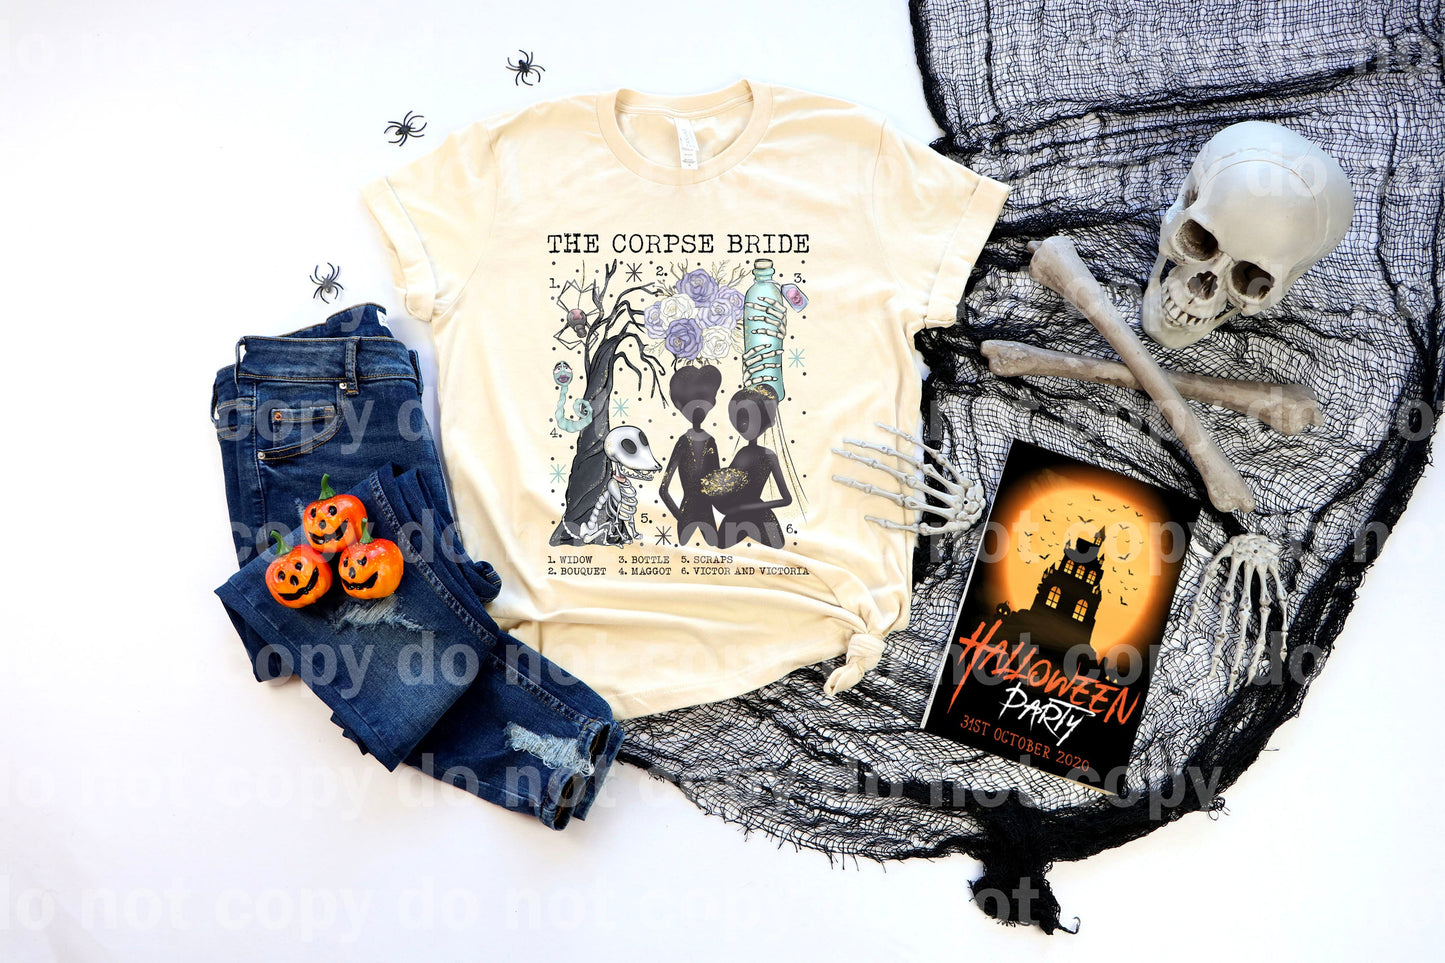 The Corpse Bride Dream Print or Sublimation Print